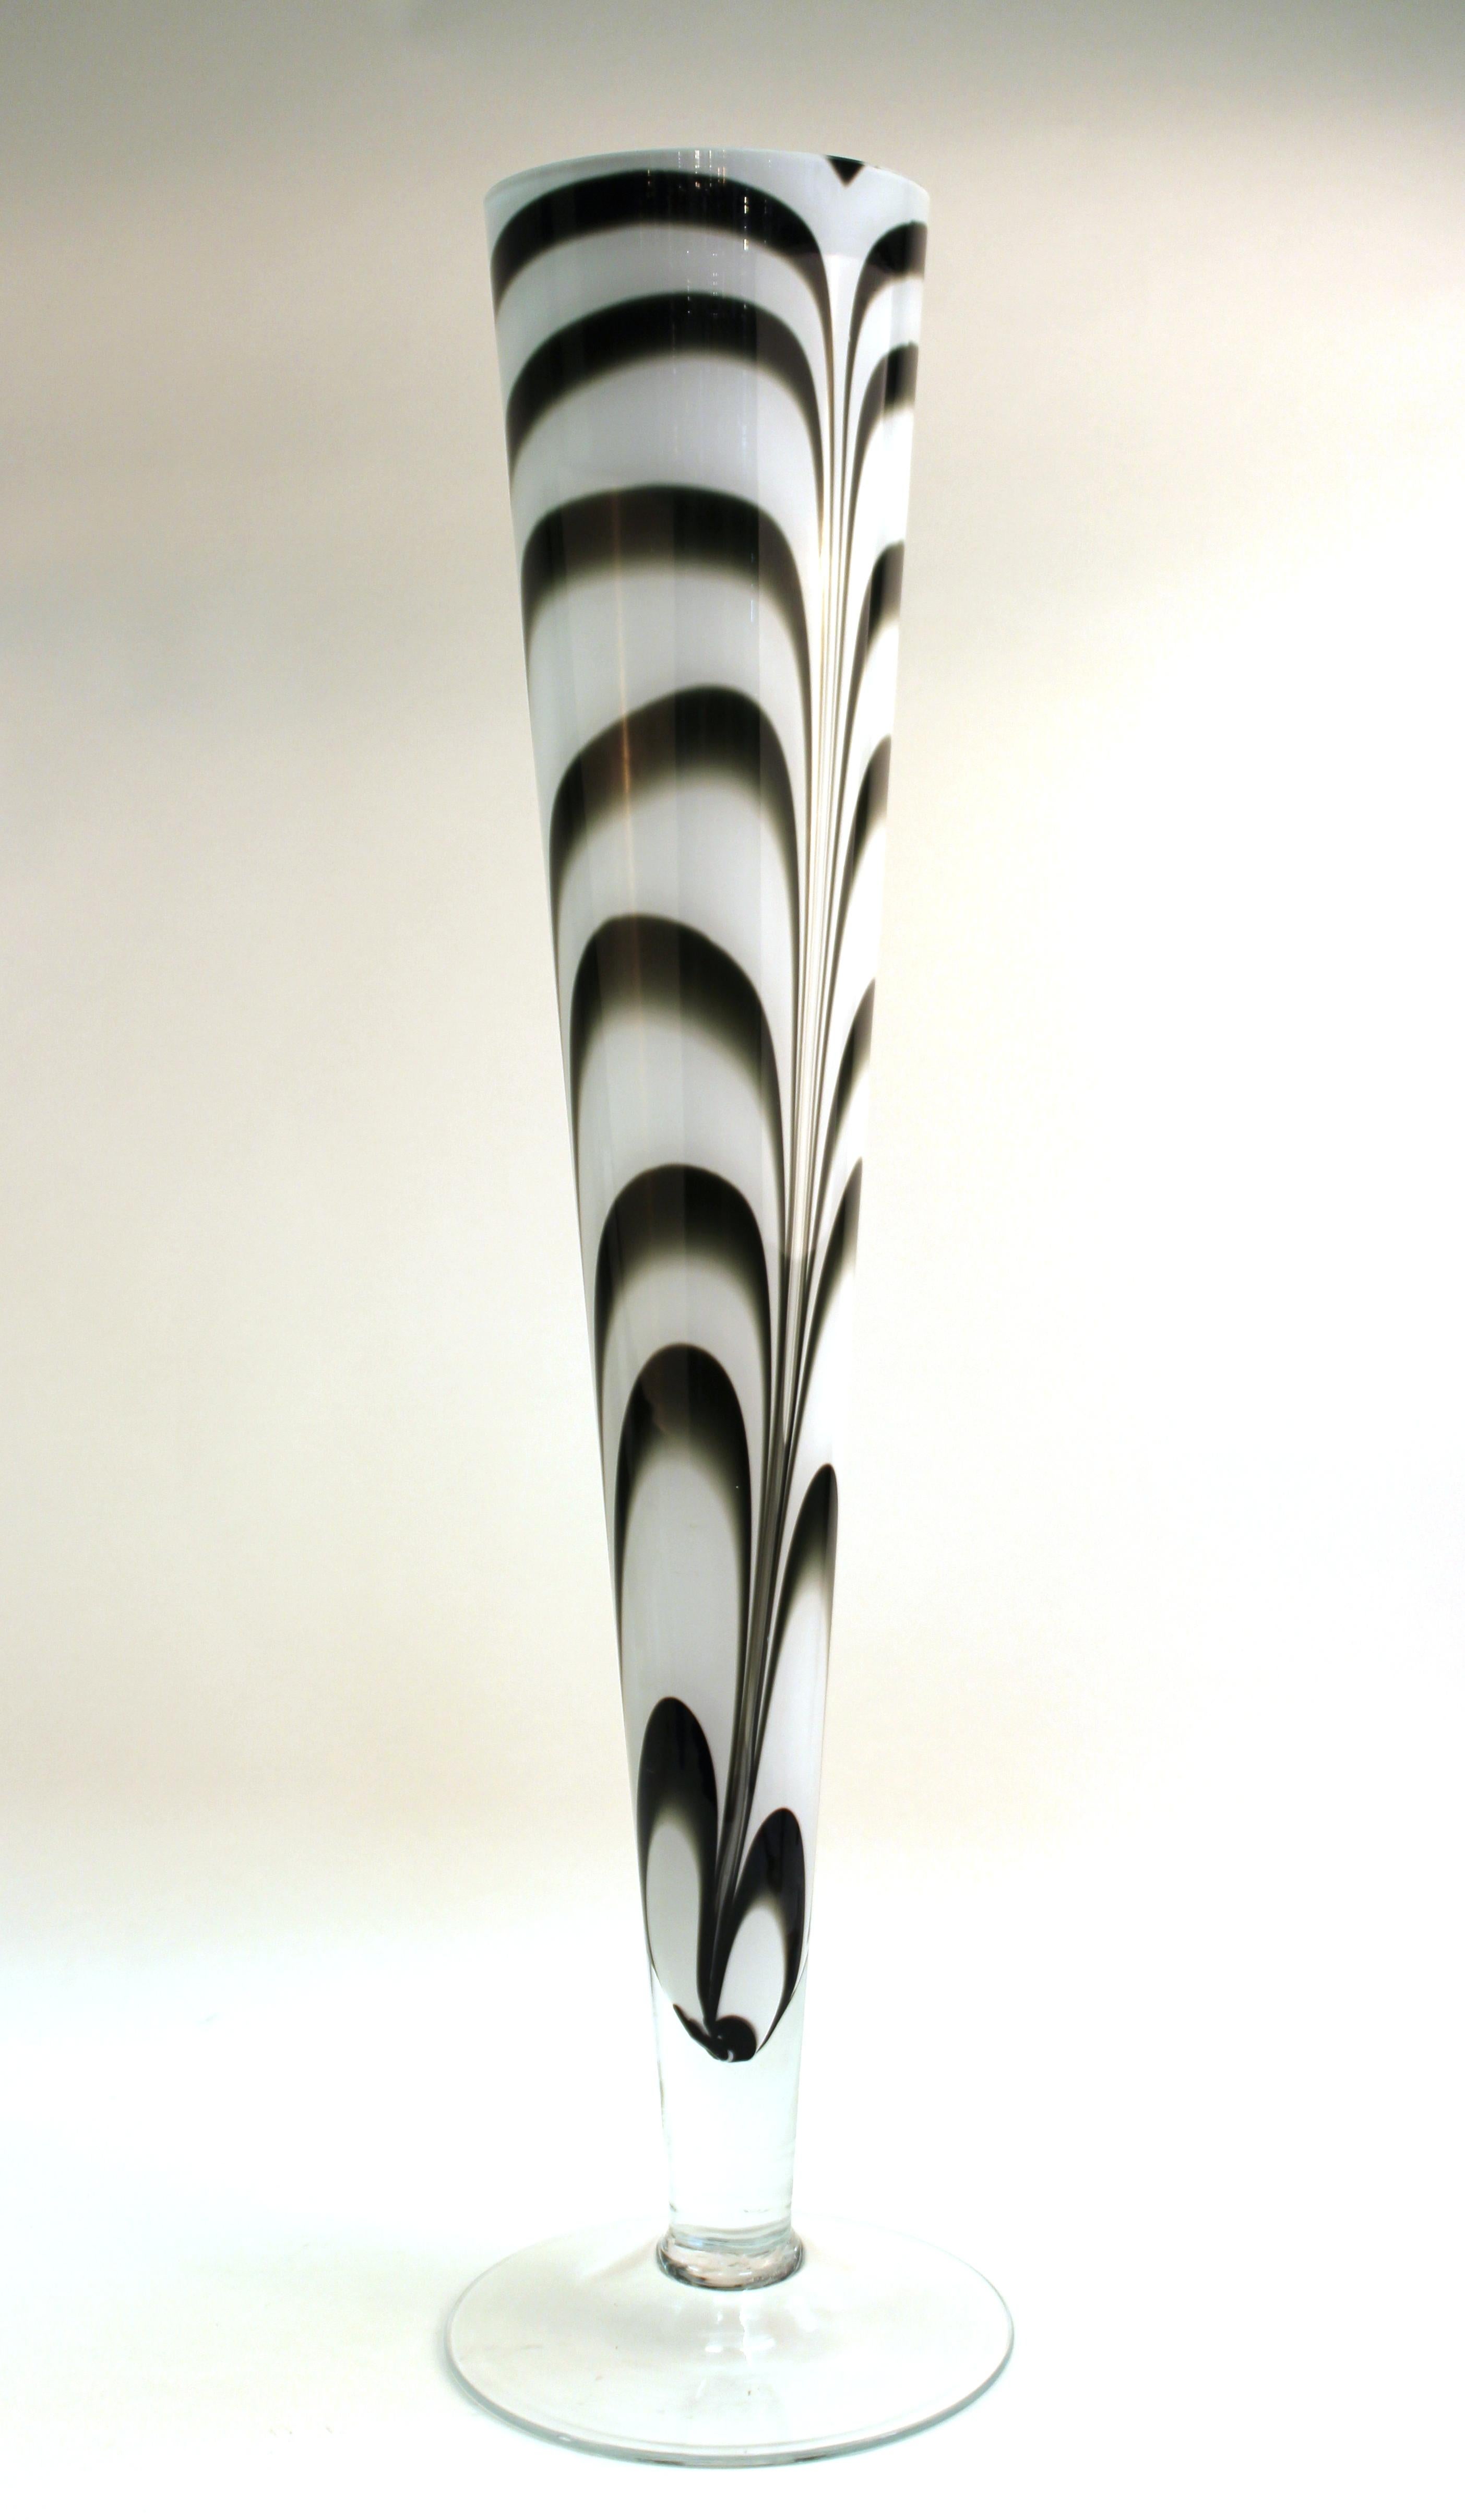 Postmodern oversized tubular shaped art glass vase designed in white feathered glass encased in clear glass. The piece can be used as a monumental tabletop vase. In great vintage condition with age-appropriate wear and use.